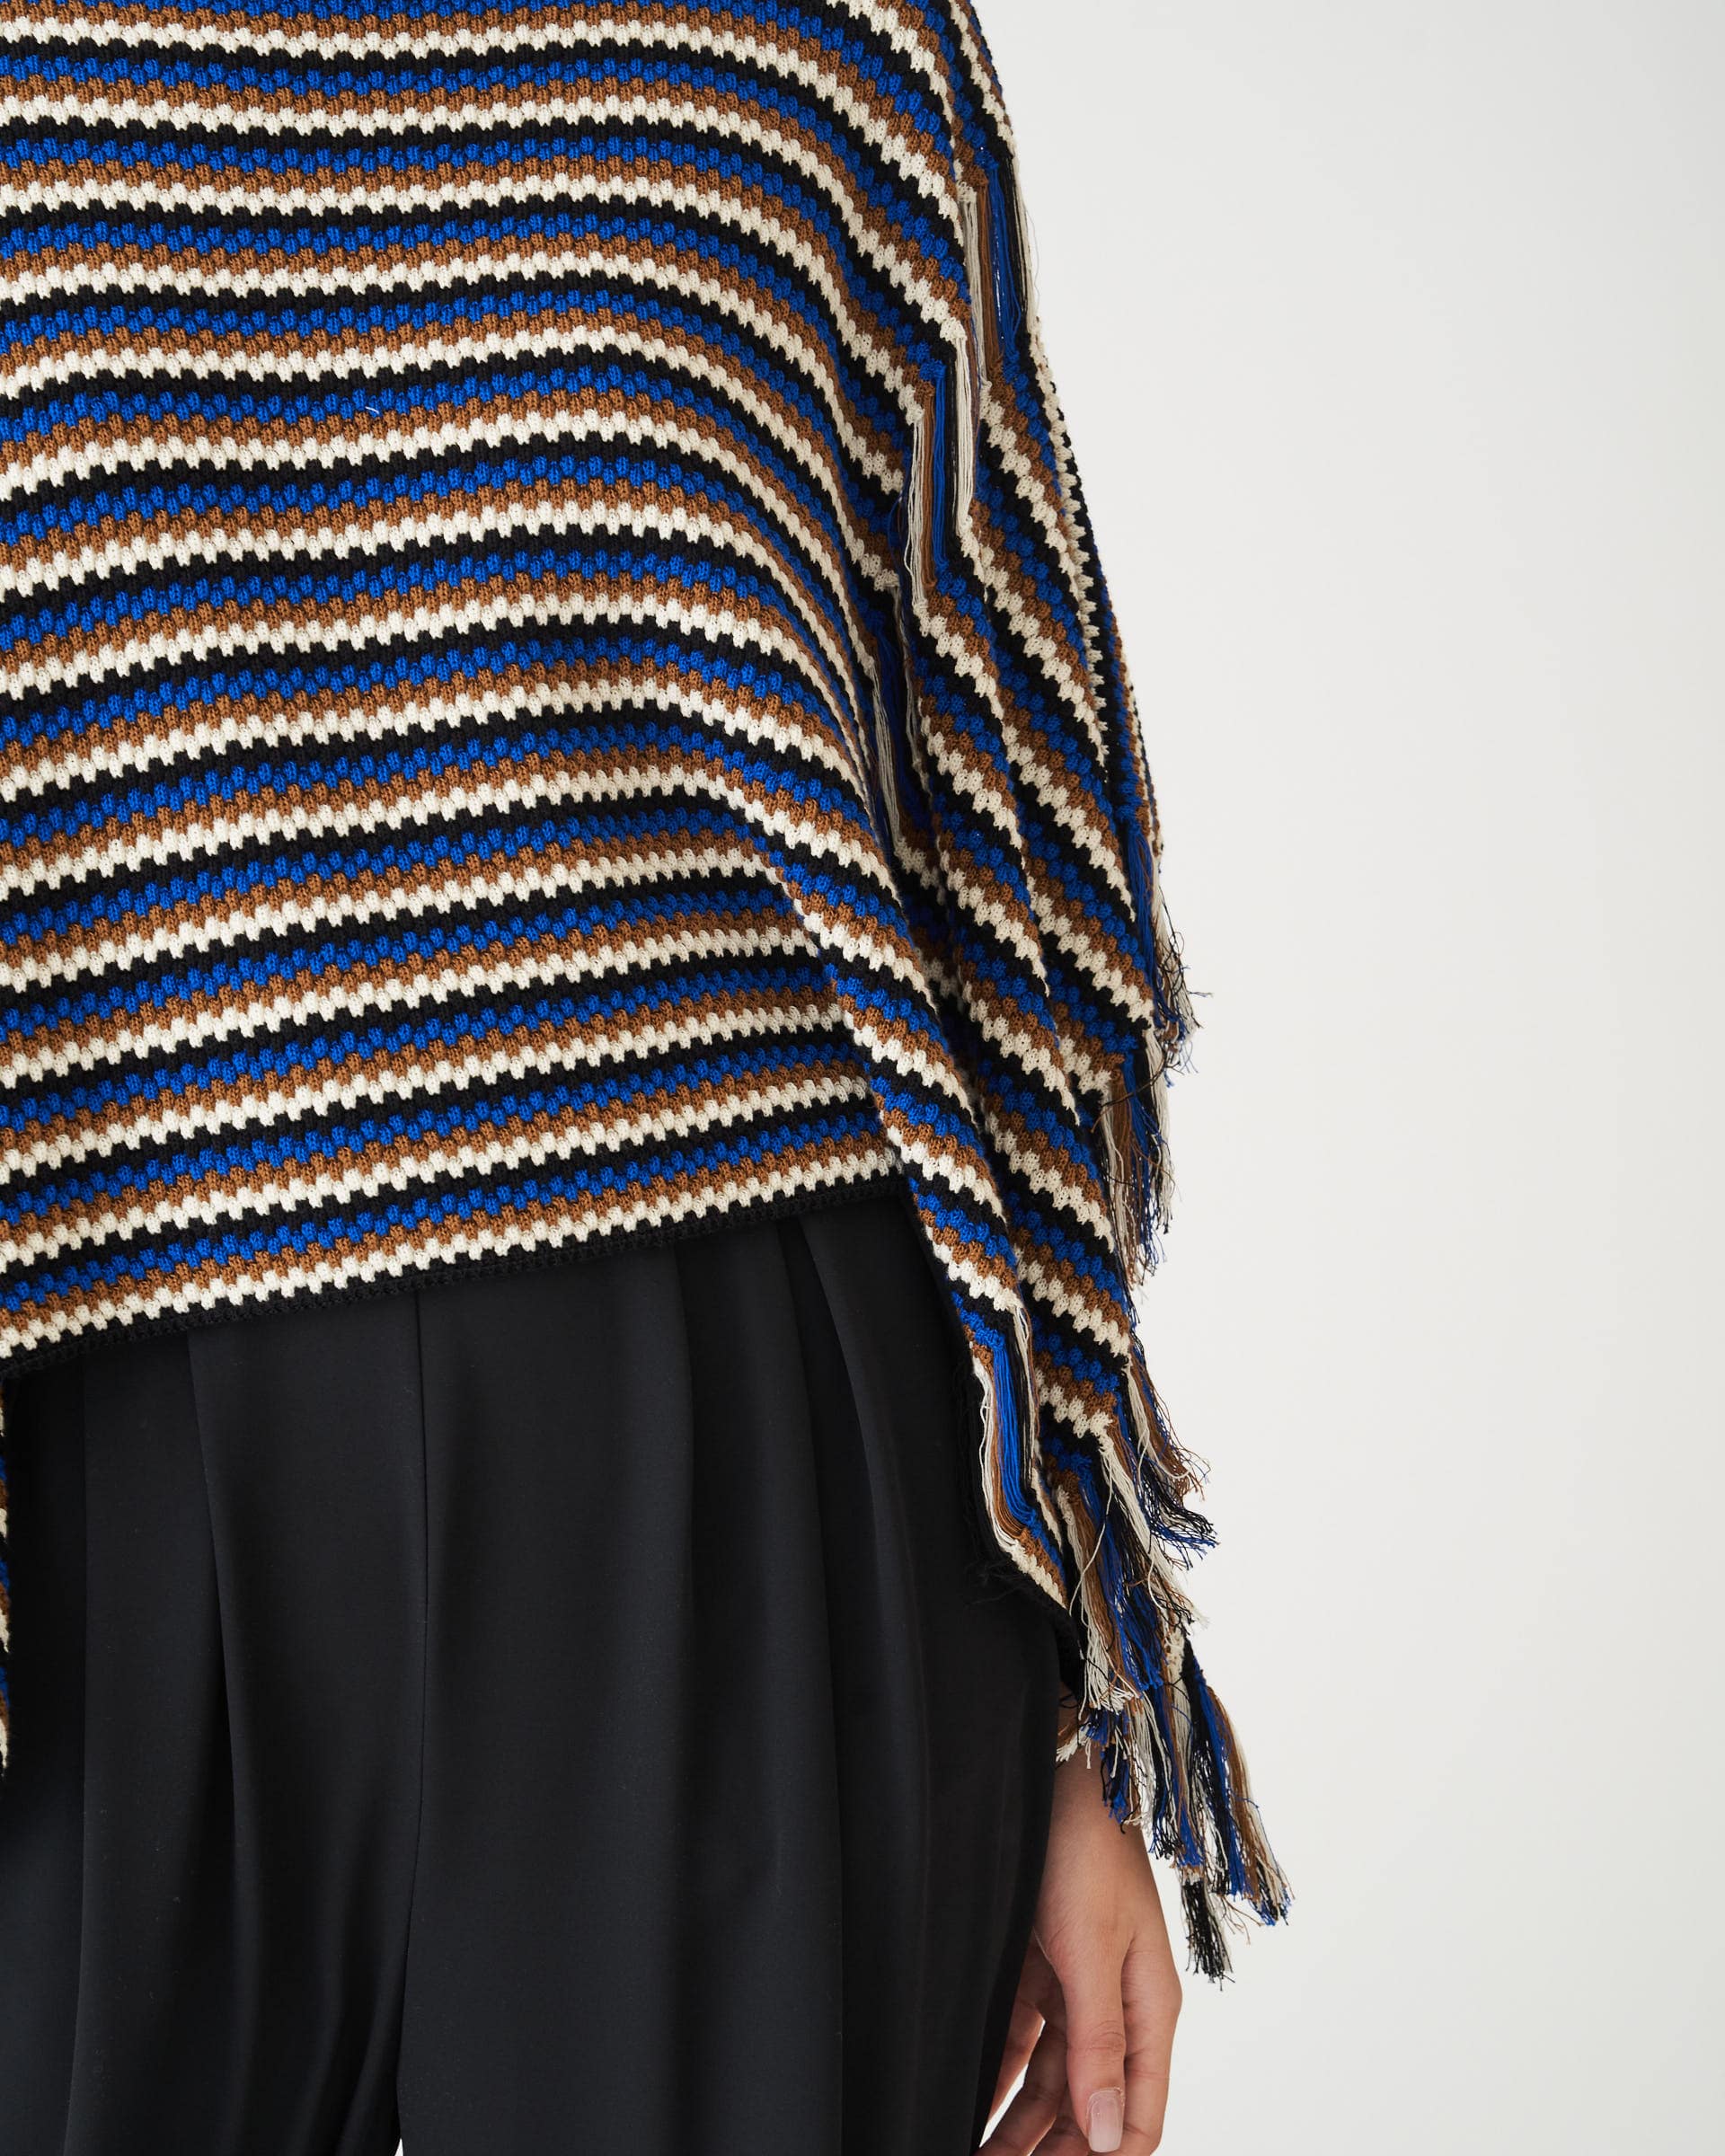 The Market Store | Striped Cape With Fringes